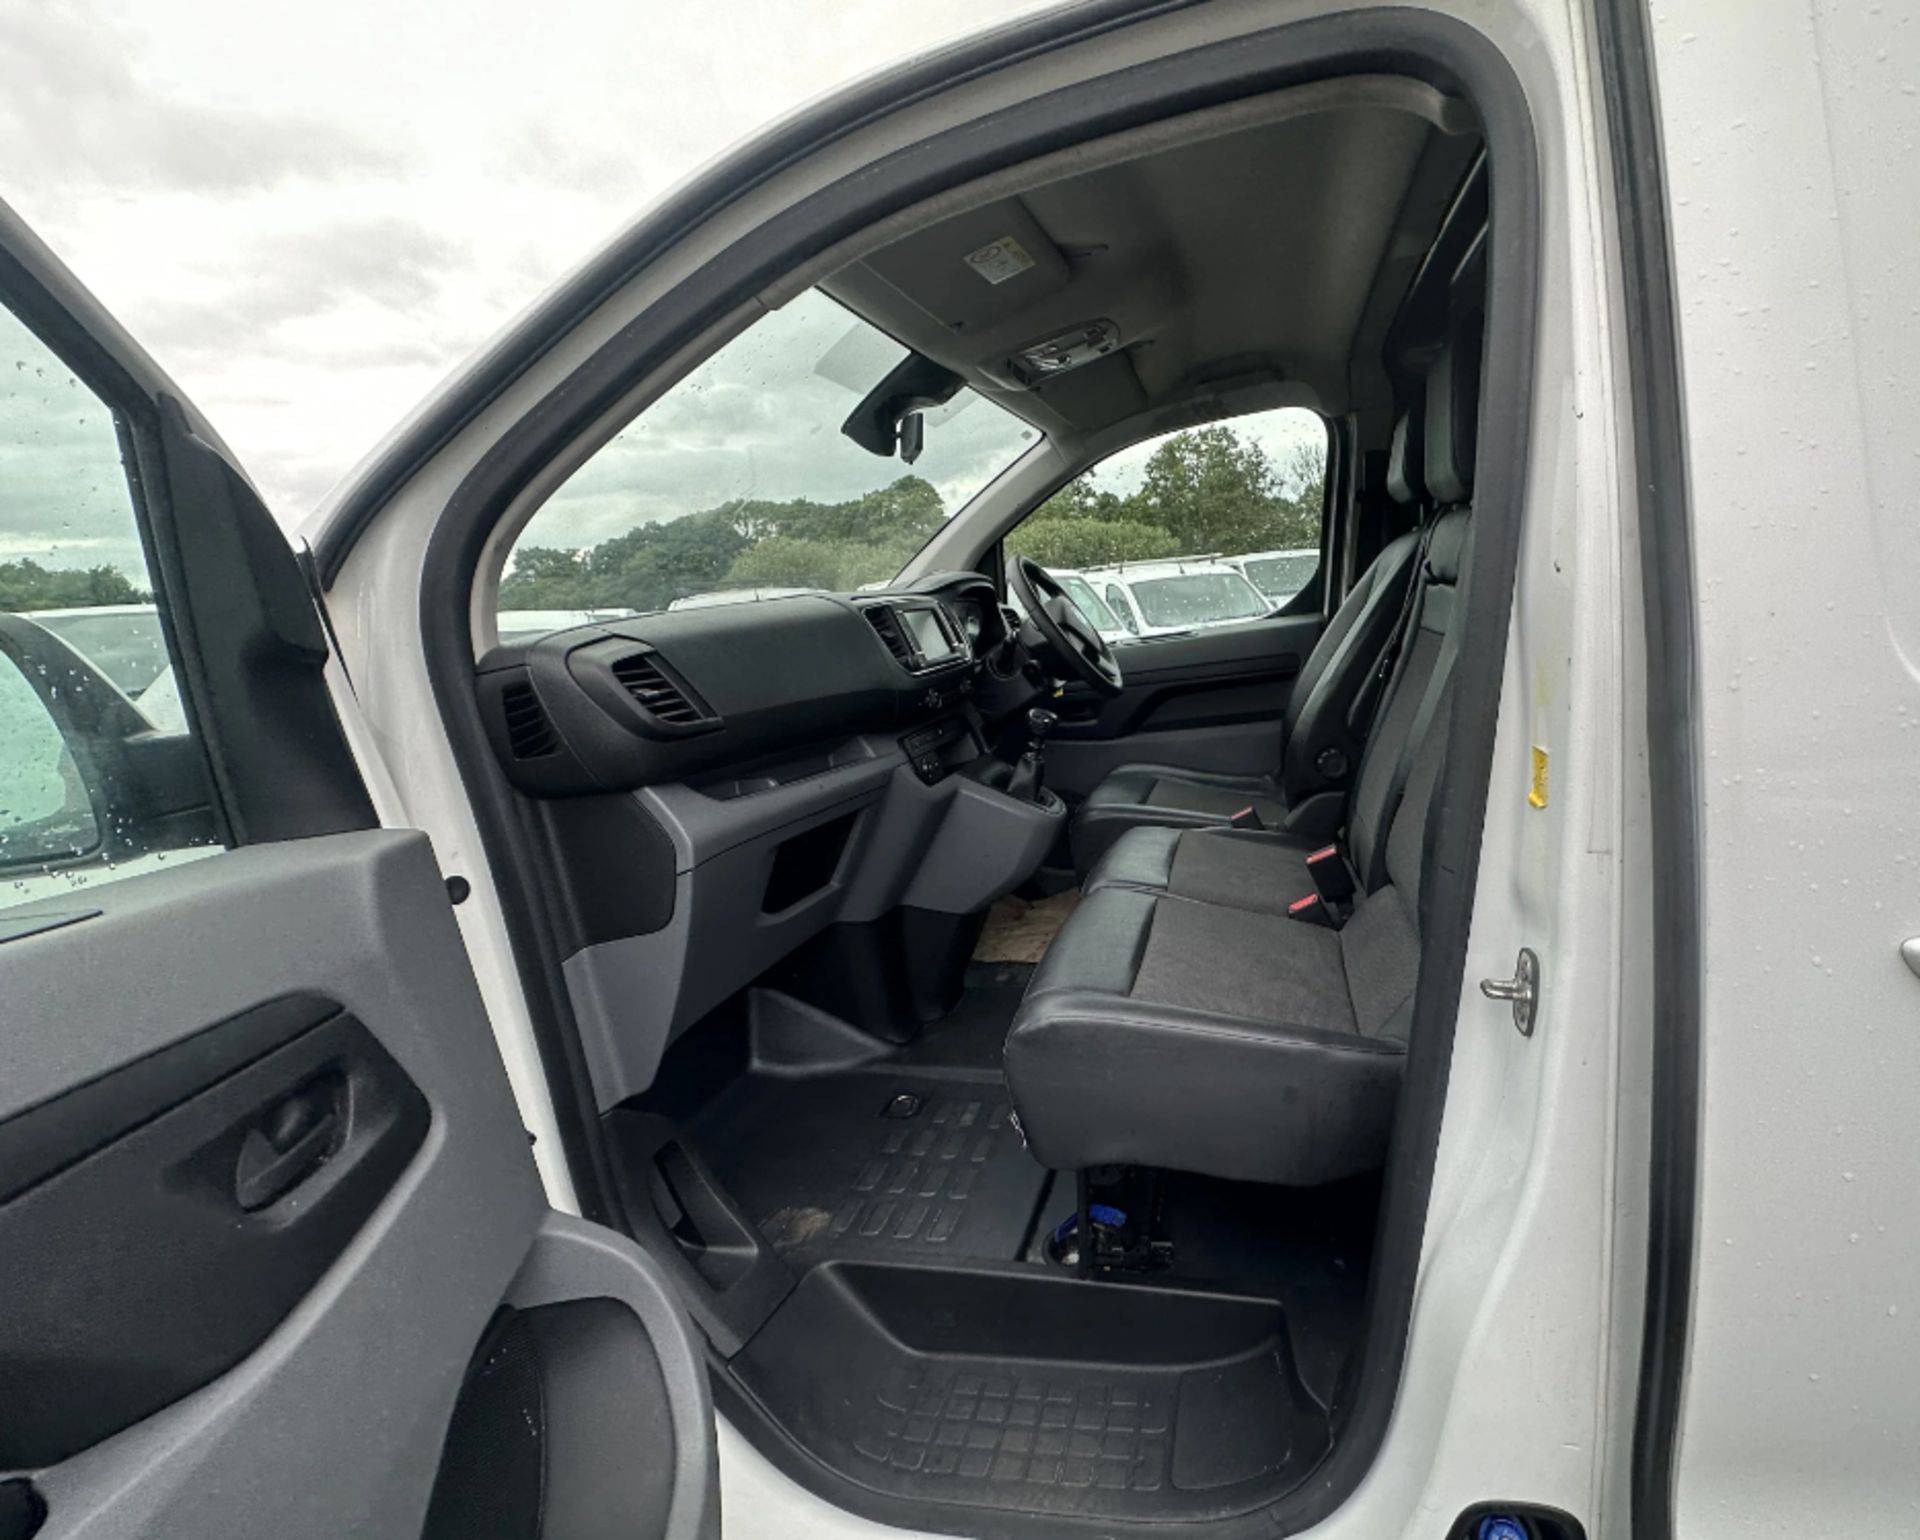 LOW-MILEAGE ONLY 70K MILES - 2019 VIVARO L2 DIESEL: READY TO ROLL - Image 10 of 11